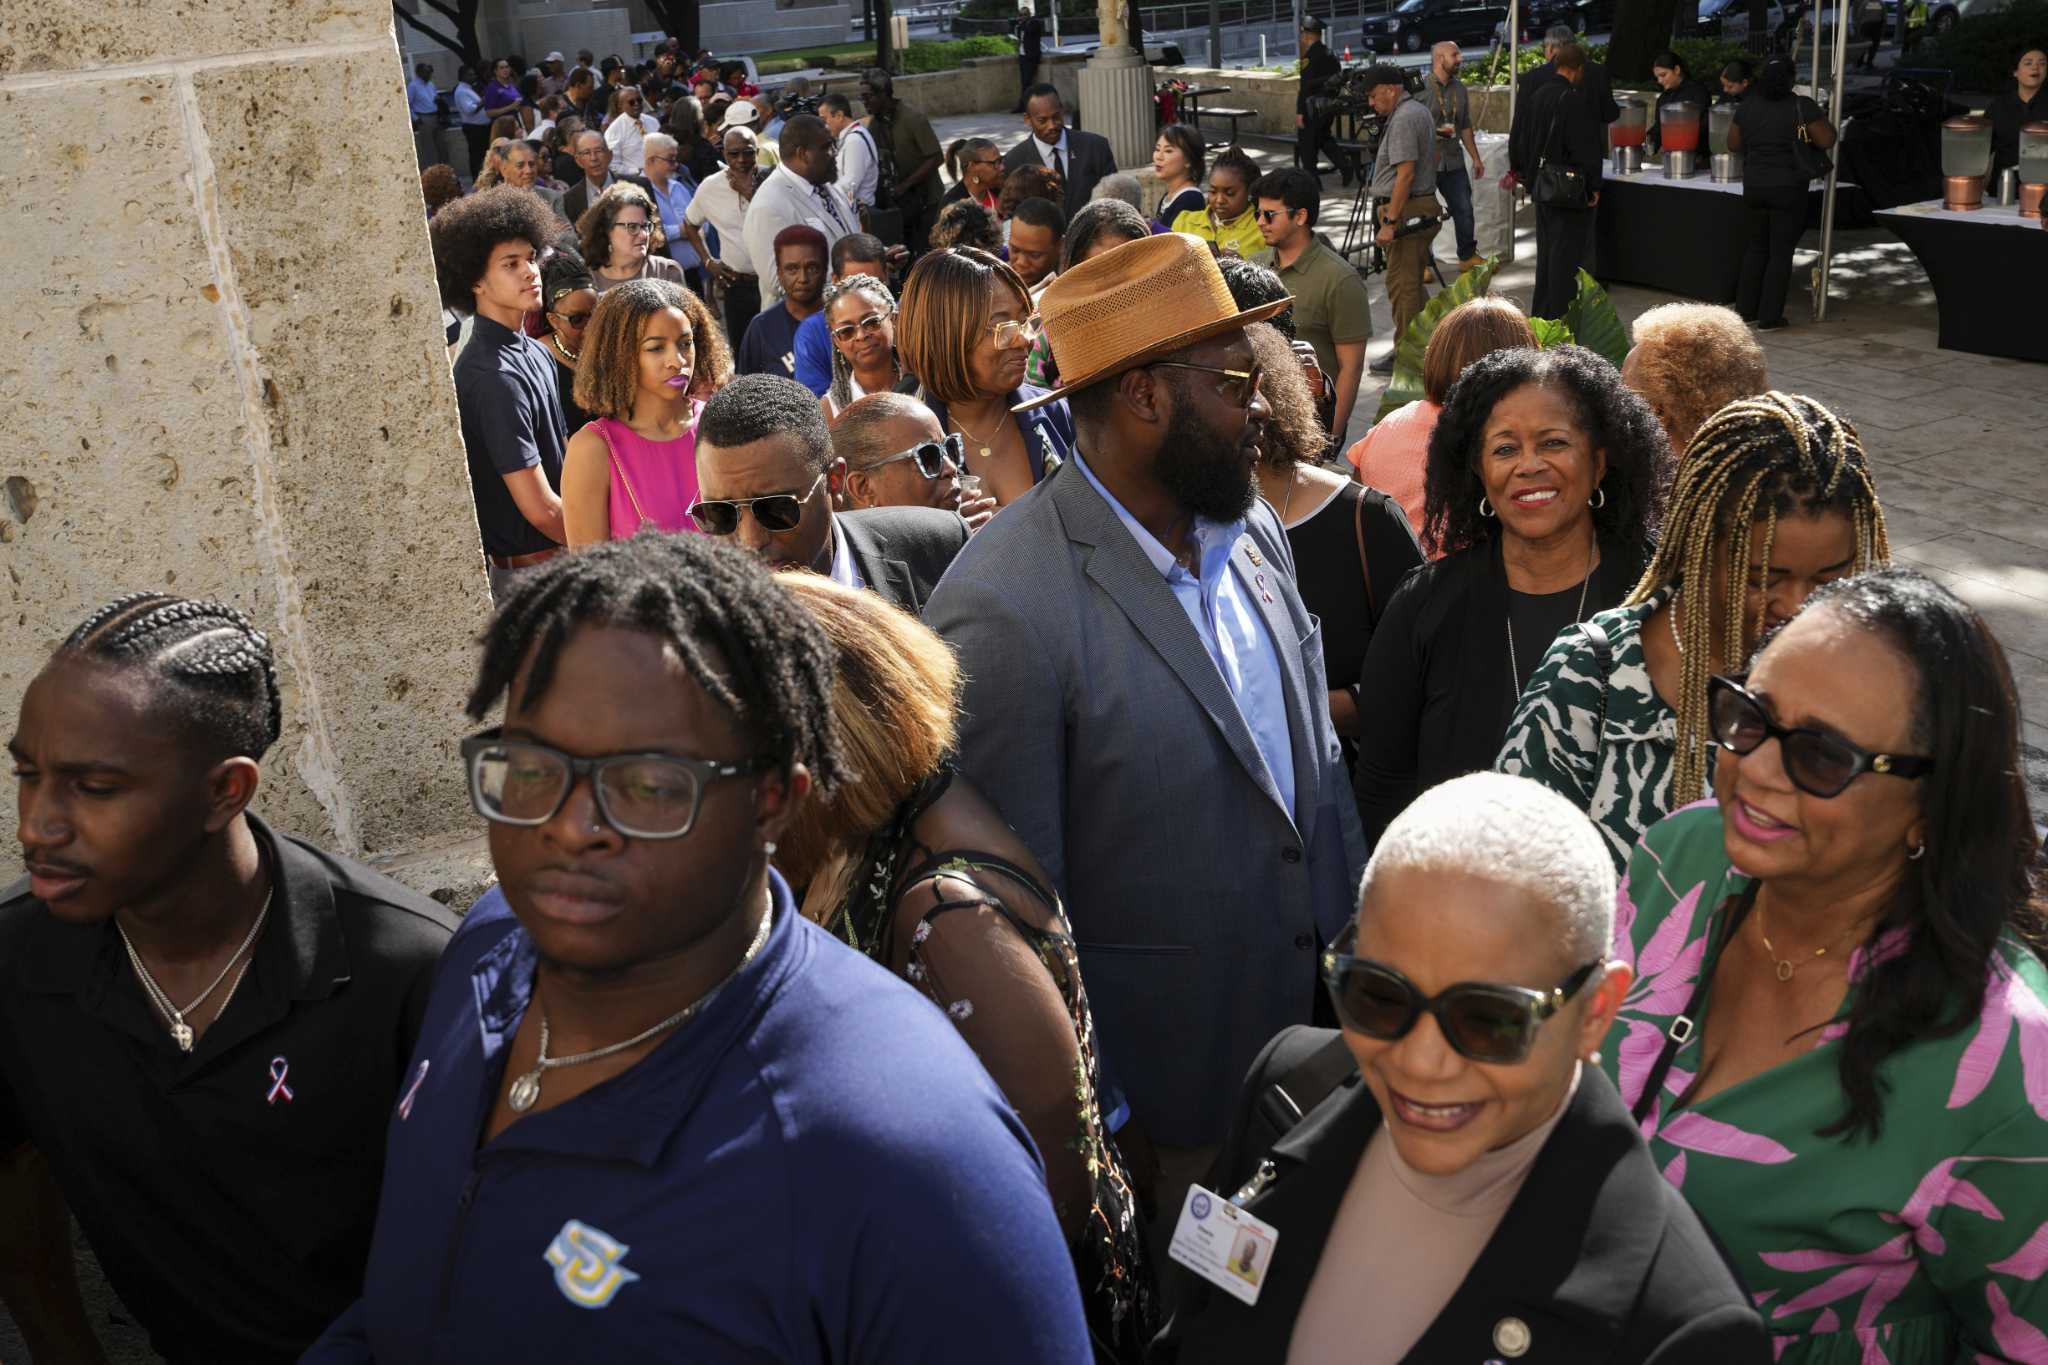 US Rep. Sheila Jackson Lee of Texas fondly remembered as she lies in state at Houston city hall